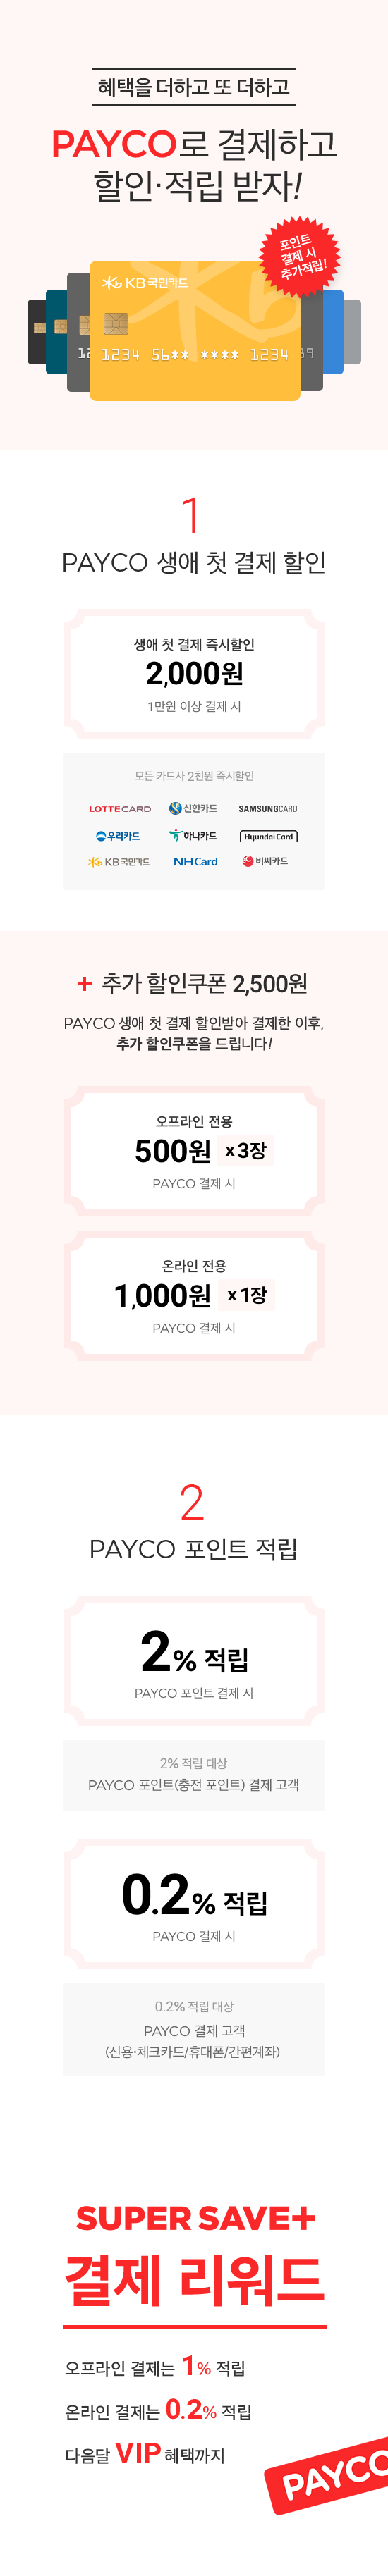 PAYCO_promo_june_143201.png